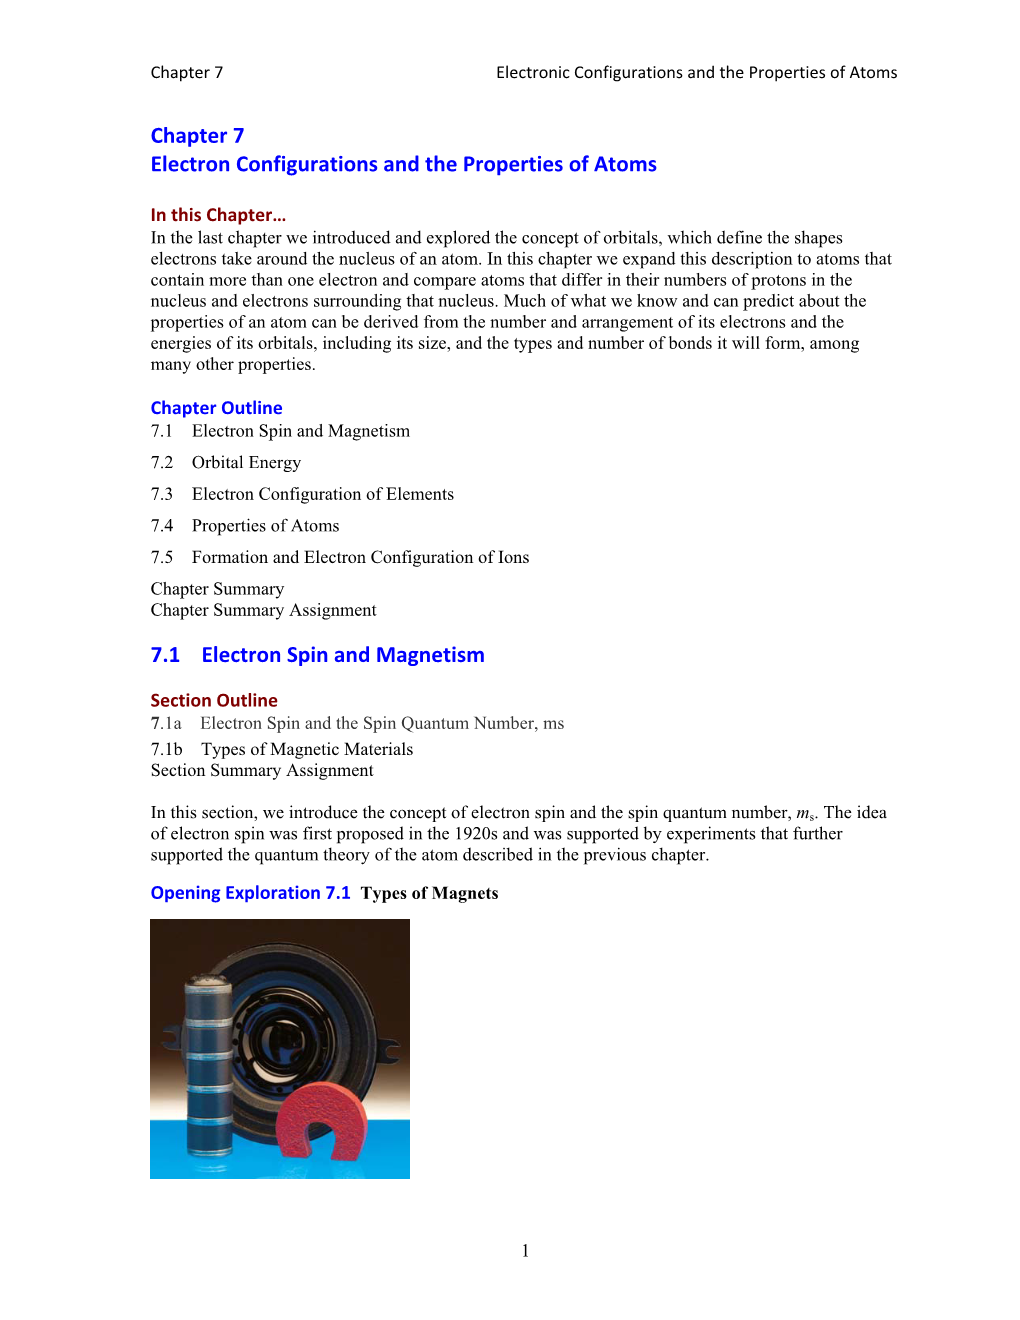 Chapter 7 Electron Configurations and the Properties of Atoms 7.1 Electron Spin and Magnetism